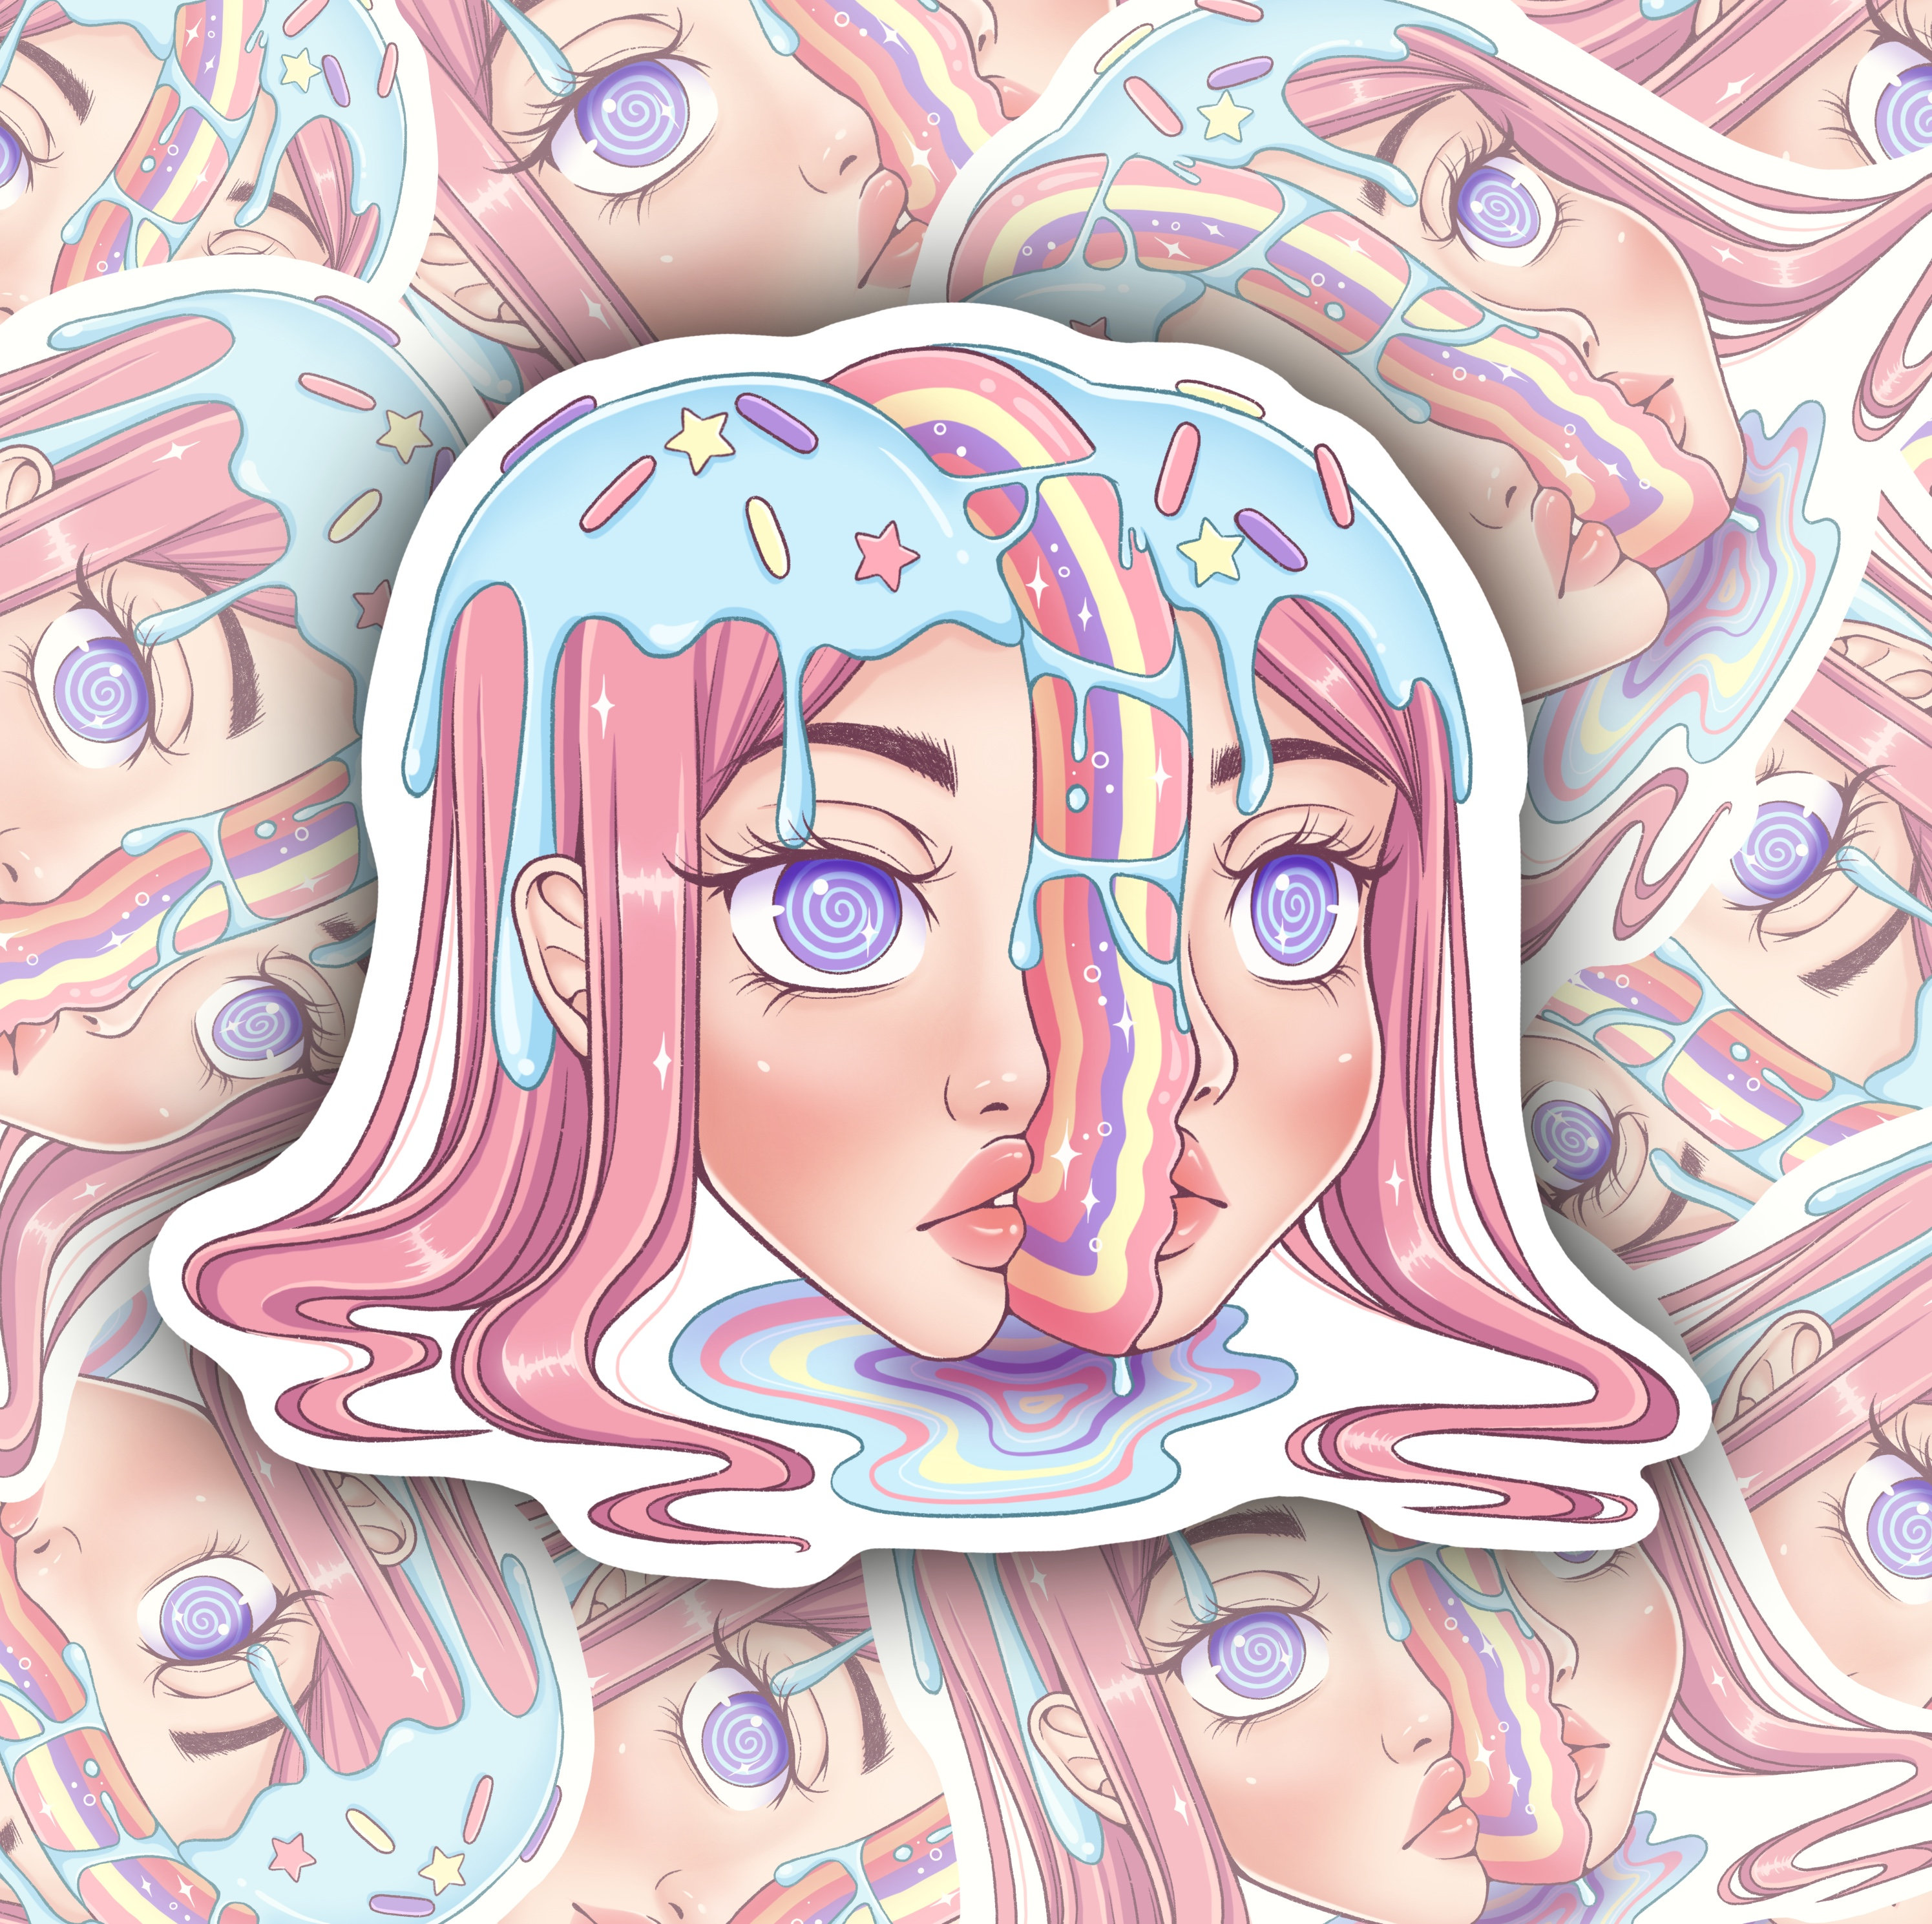 120 Kawaii Anime Girls Stickers - Aesthetic Clothes Shop